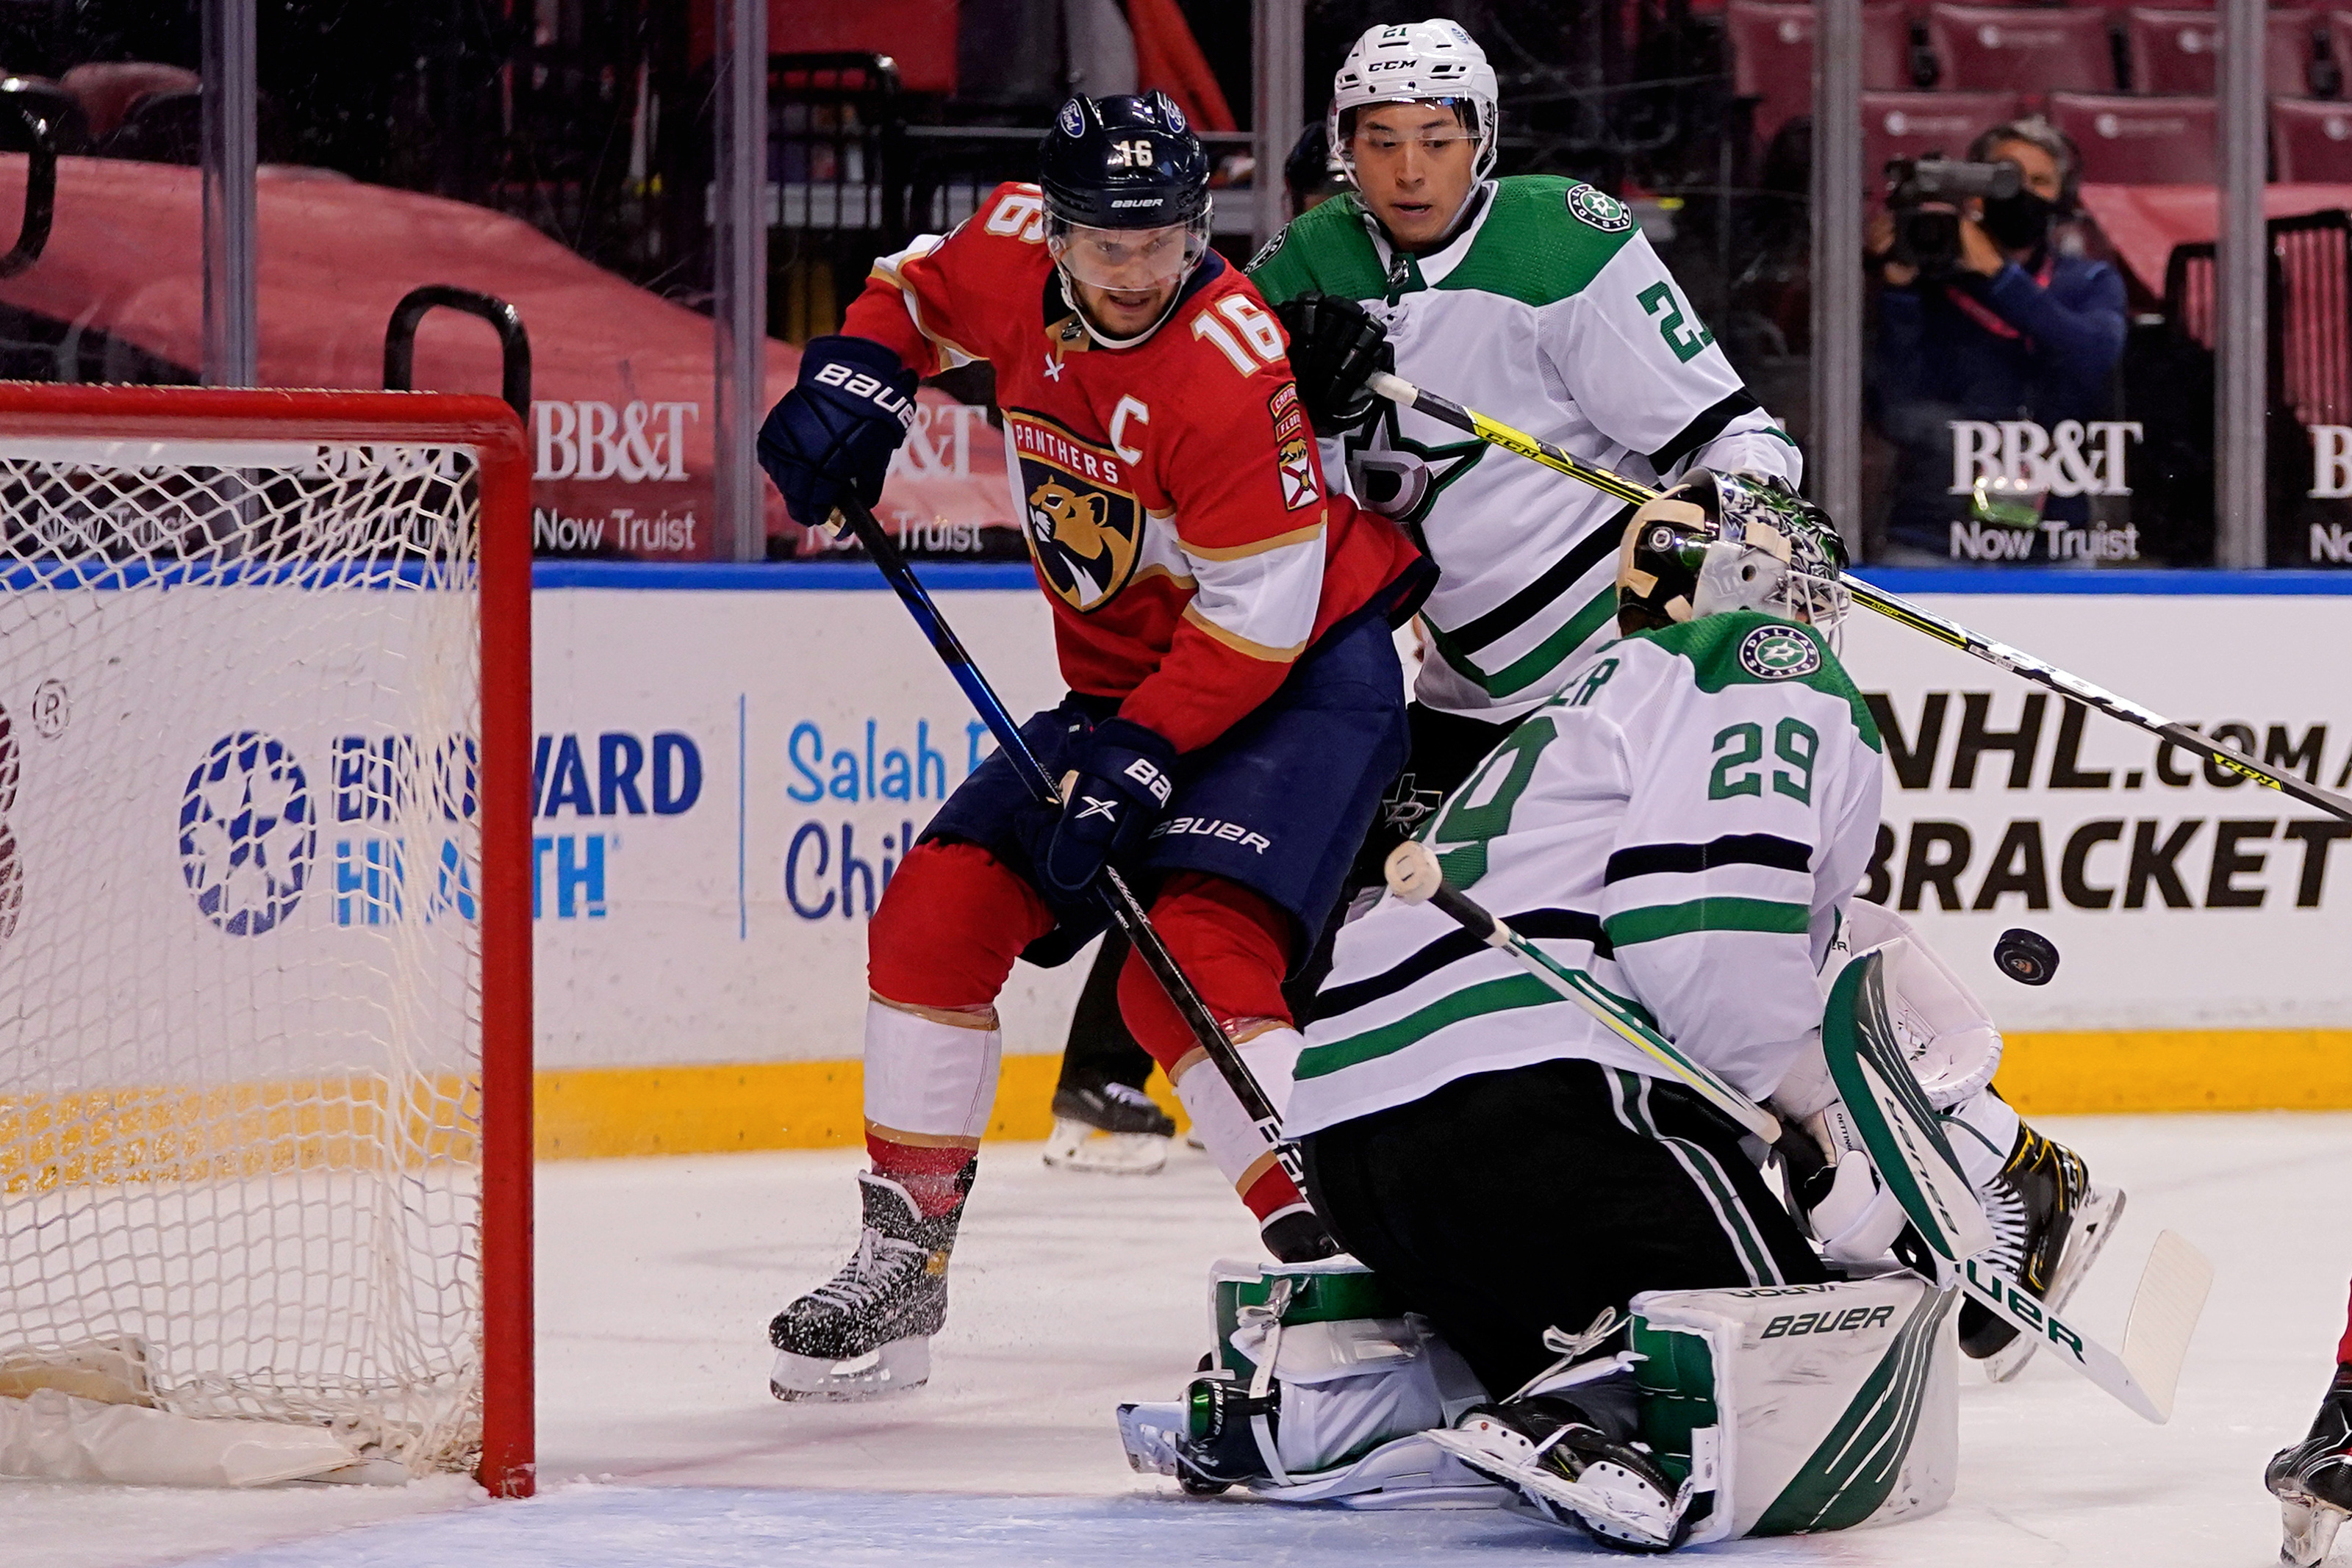 The Dallas Stars take on the Florida Panthers to start 2022